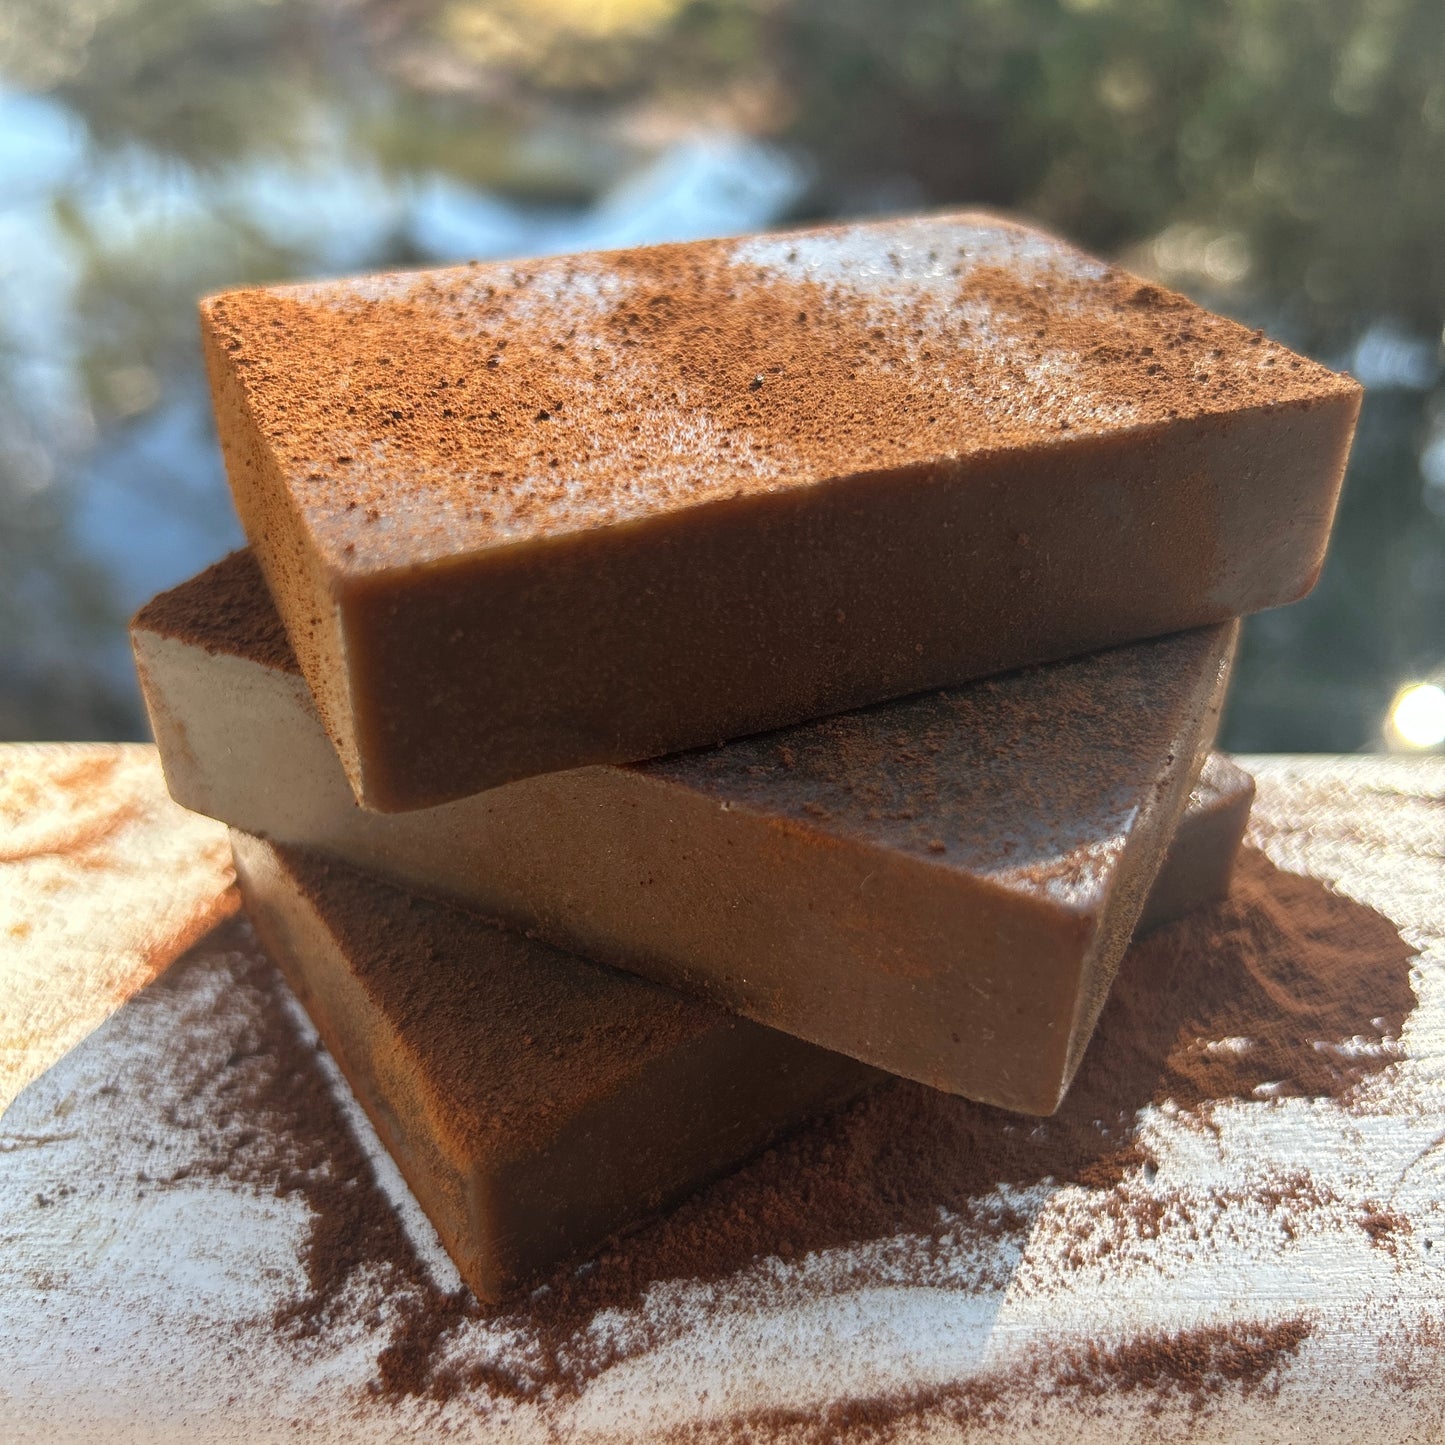 African Black Soap (with Shea Butter, Coffee, and Honey)